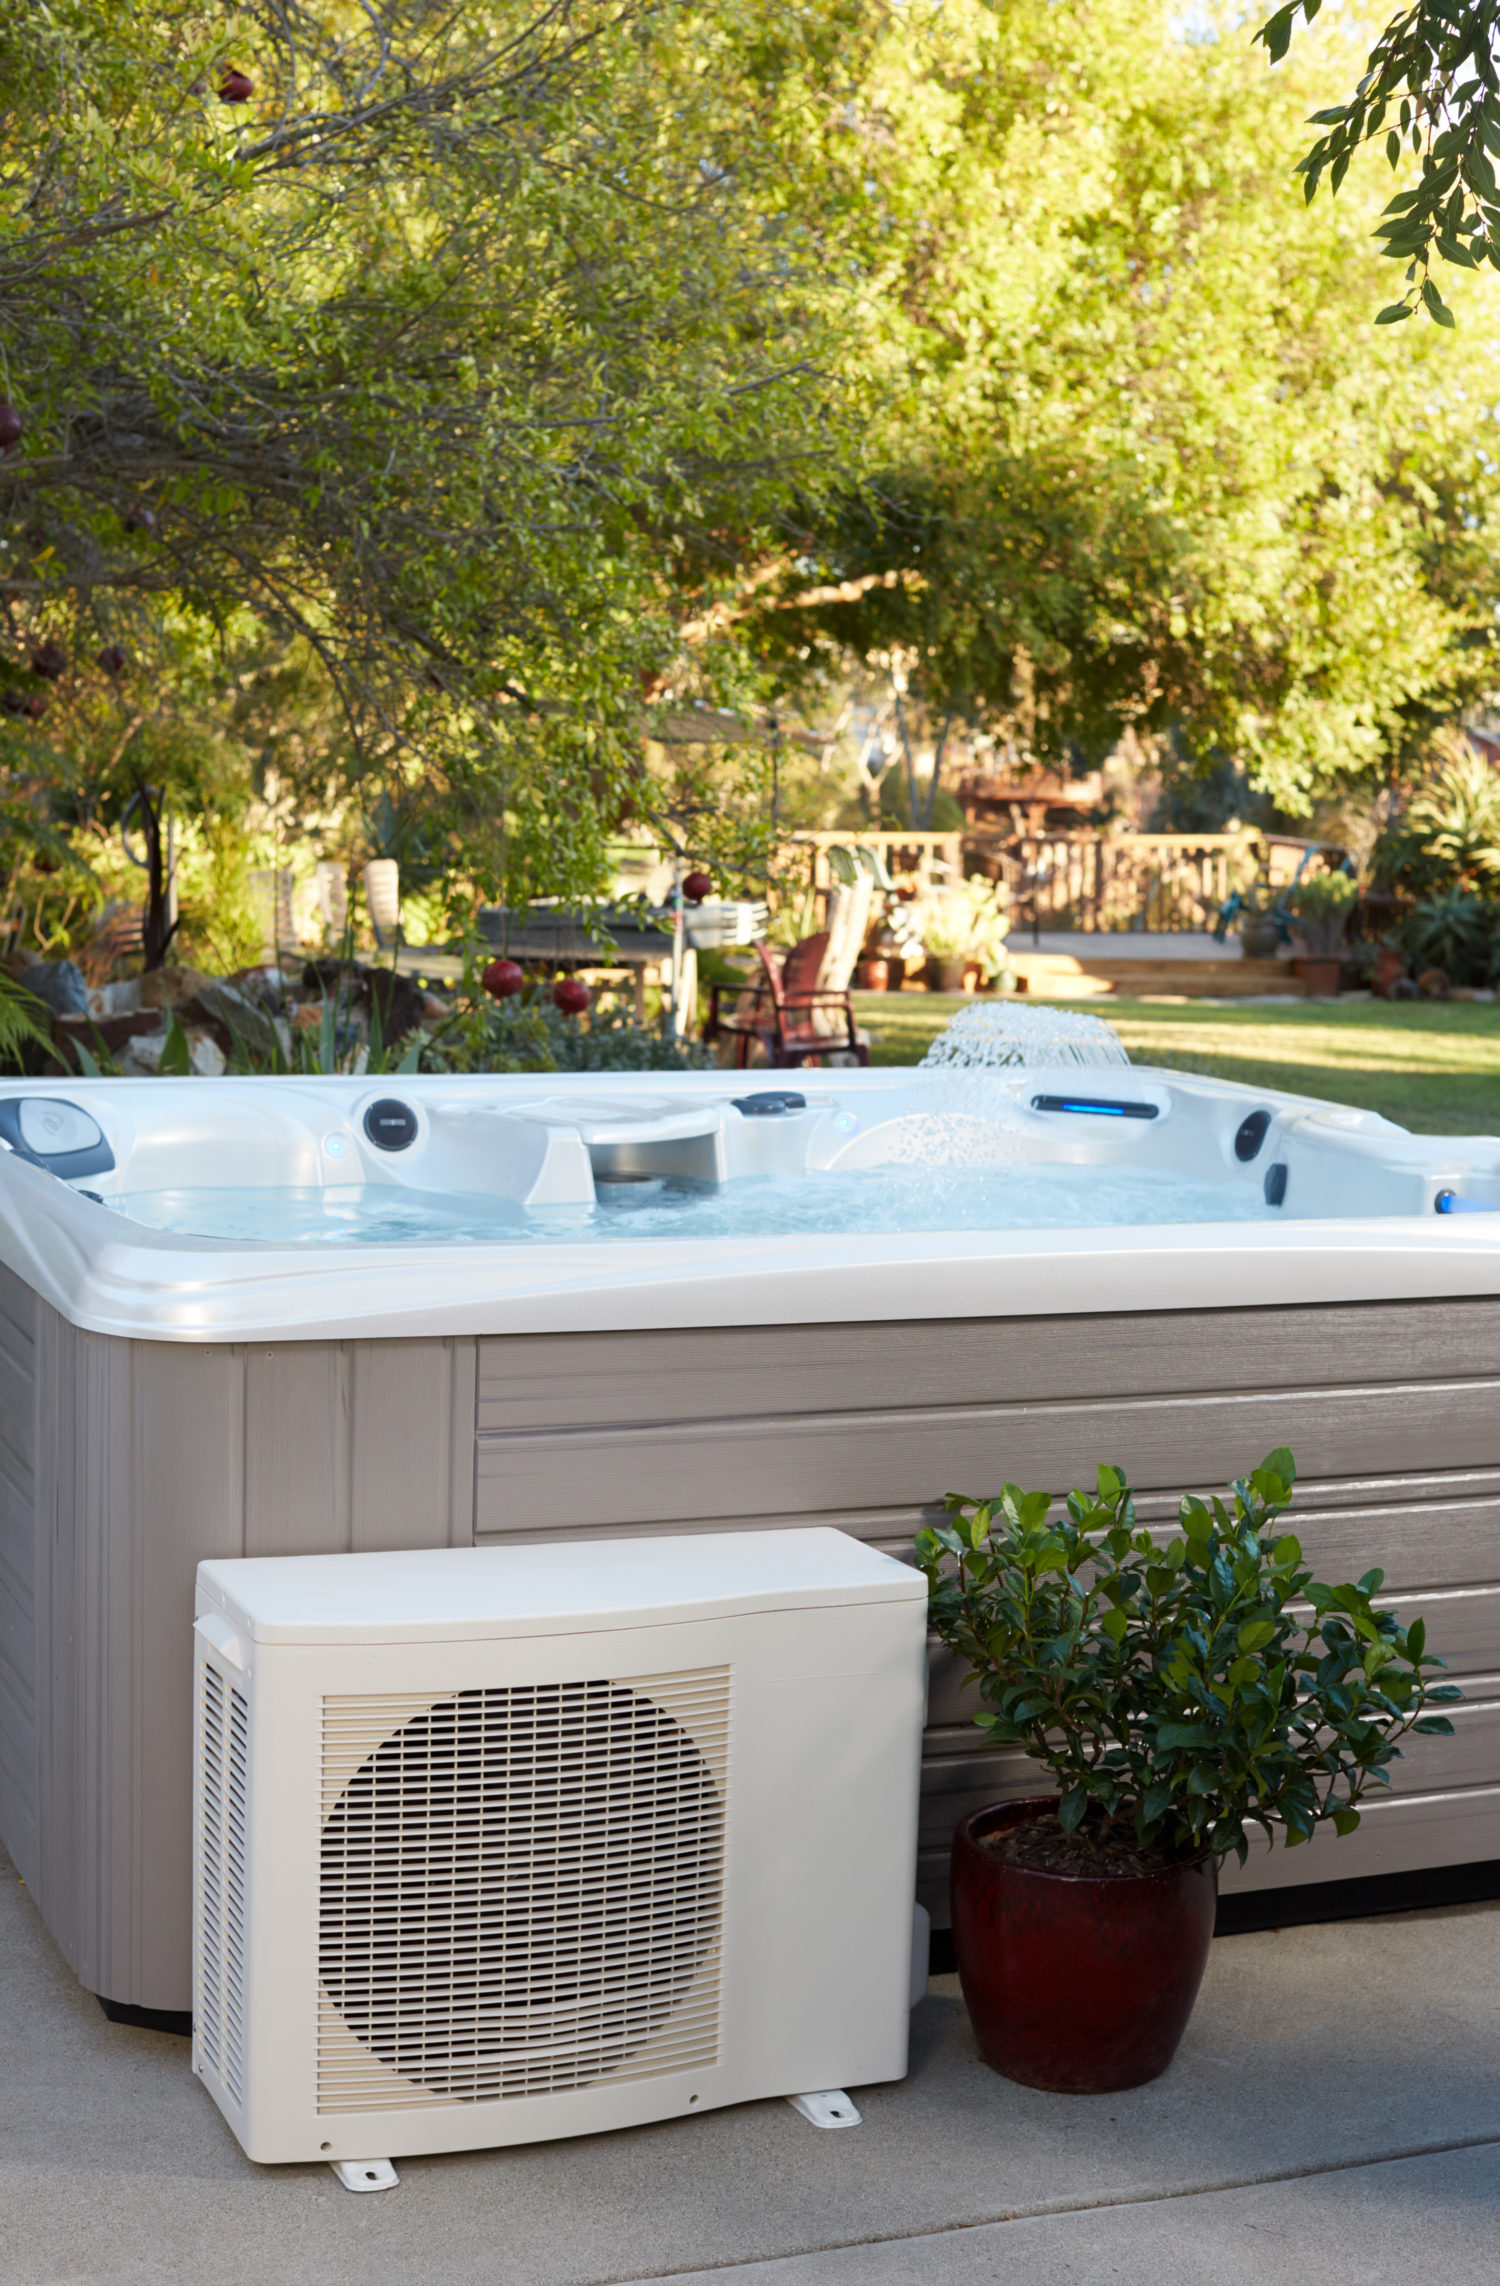 CoolZone allows you to cool your hot tub water, as well as heat it.